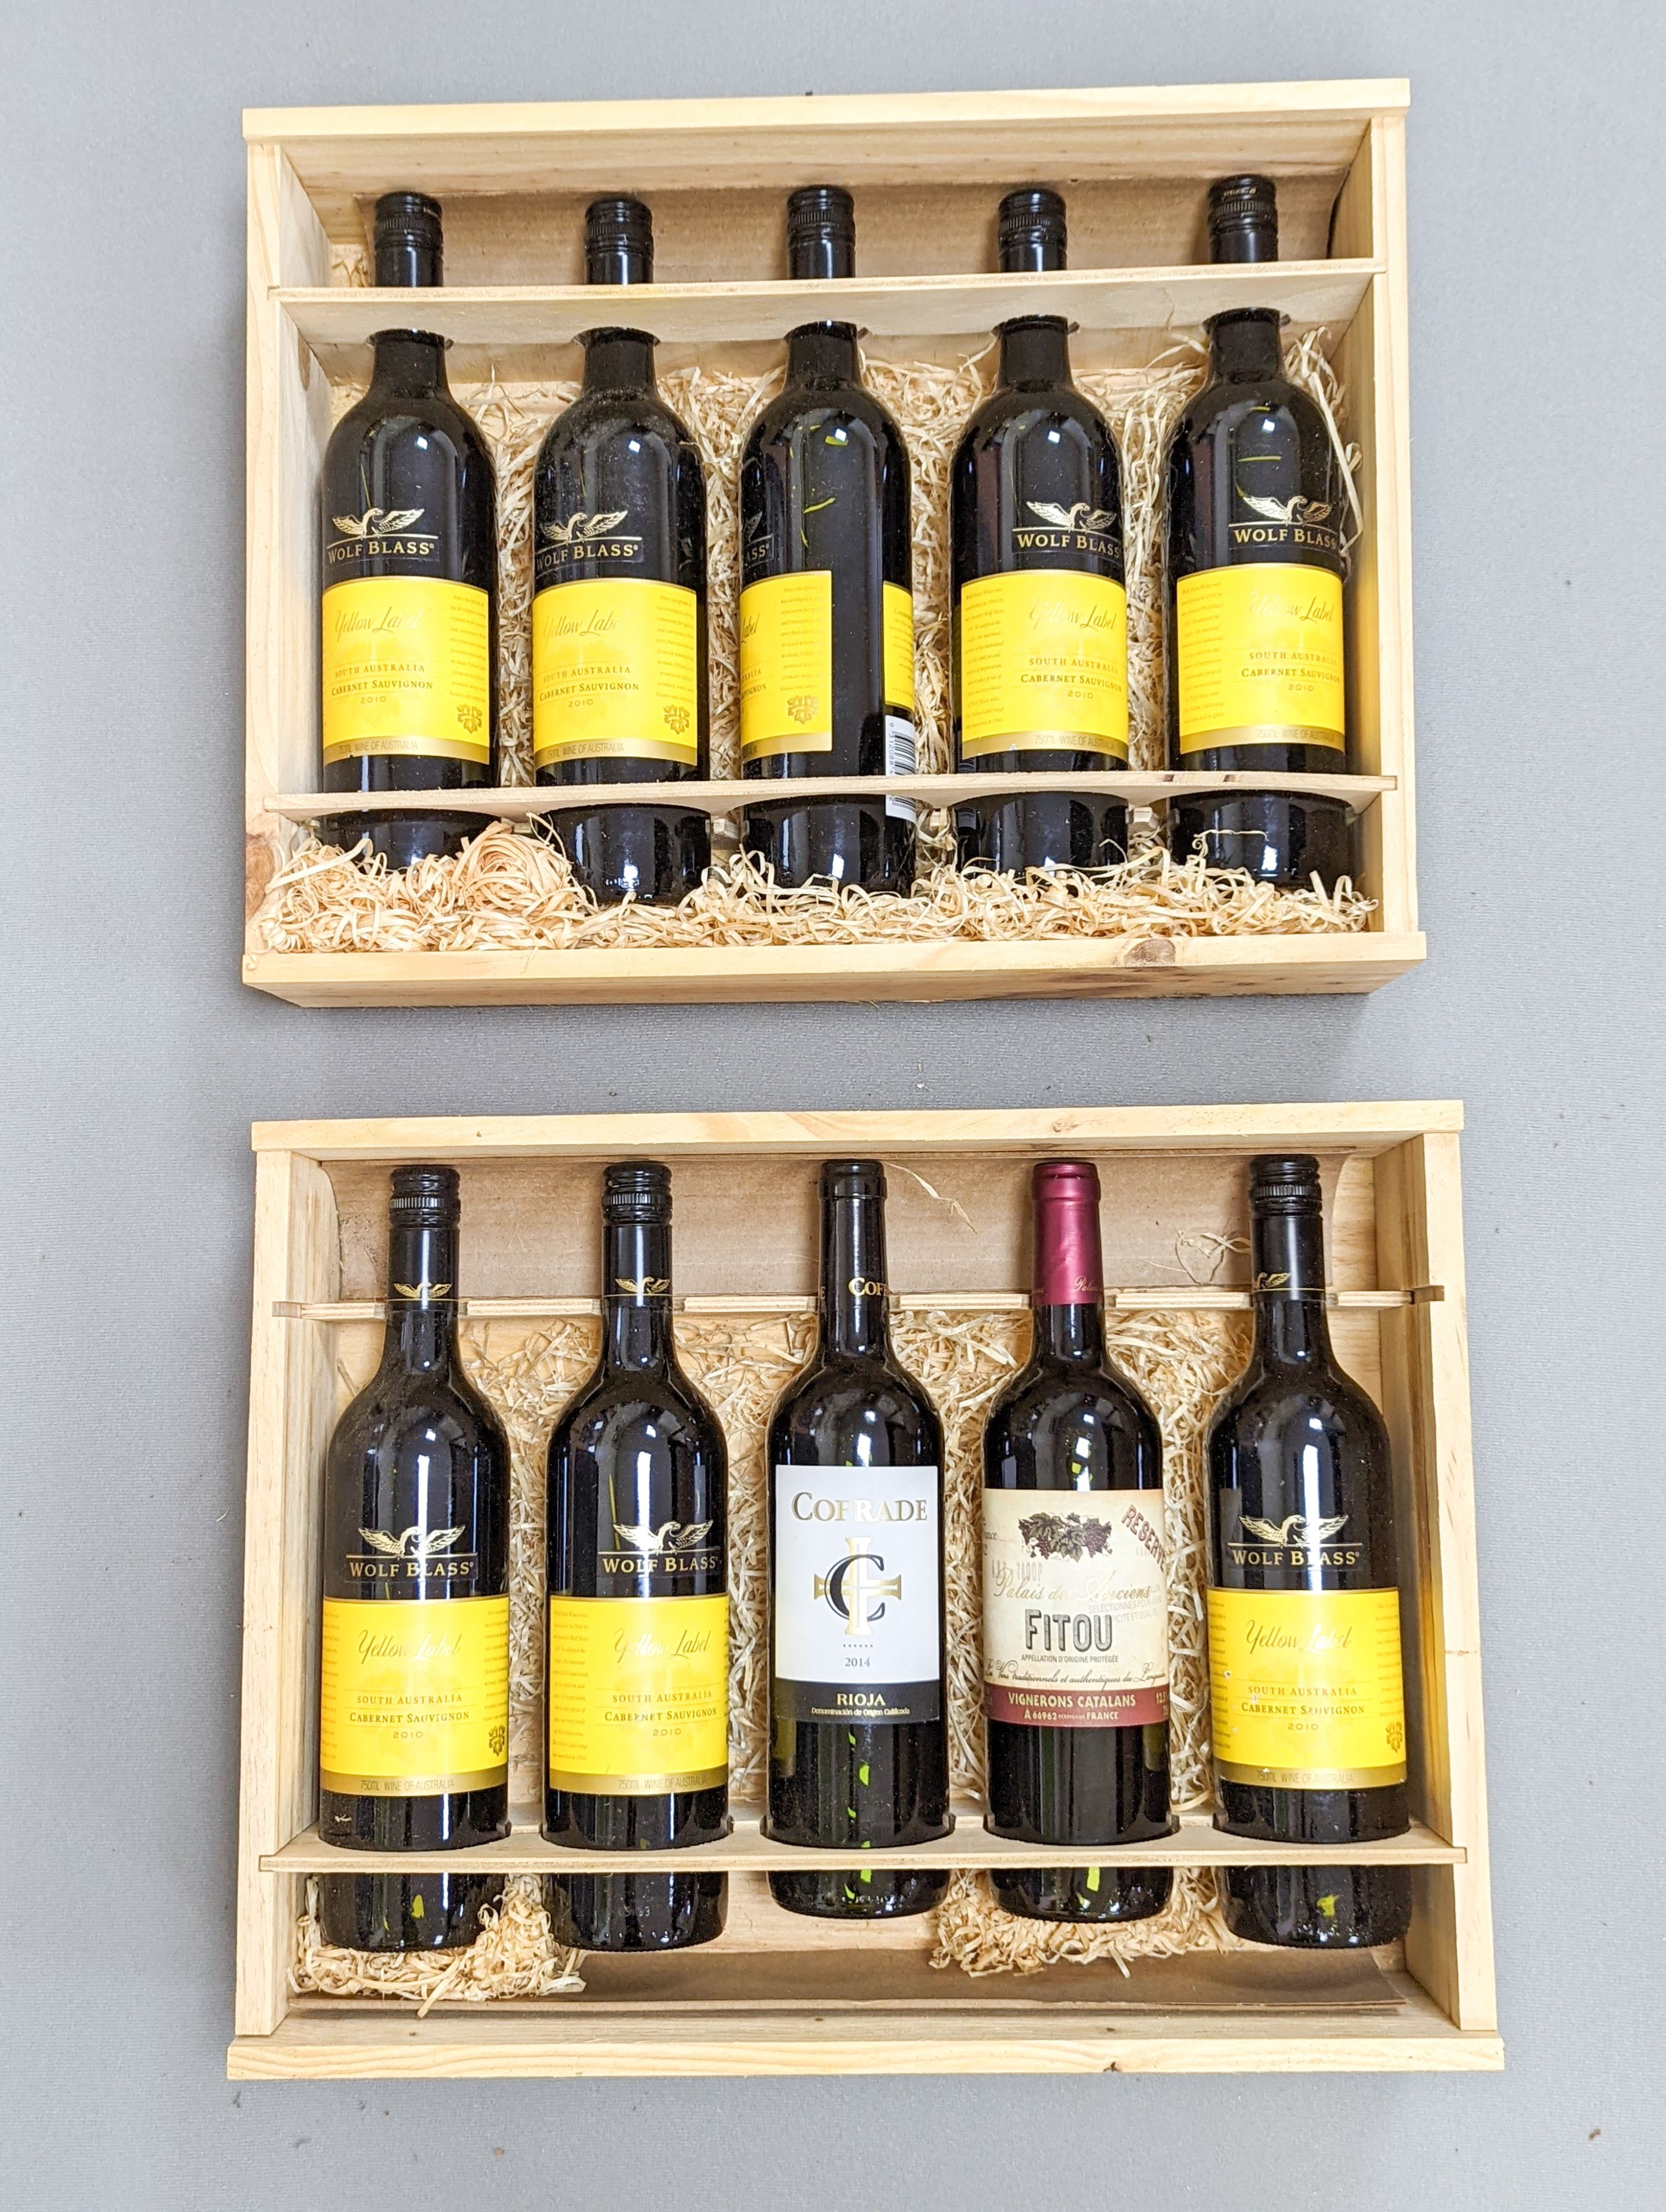 10 bottles of wine - 8 Wolf Blass yellow label Cabernet Sauvignon 2010, and two other bottles